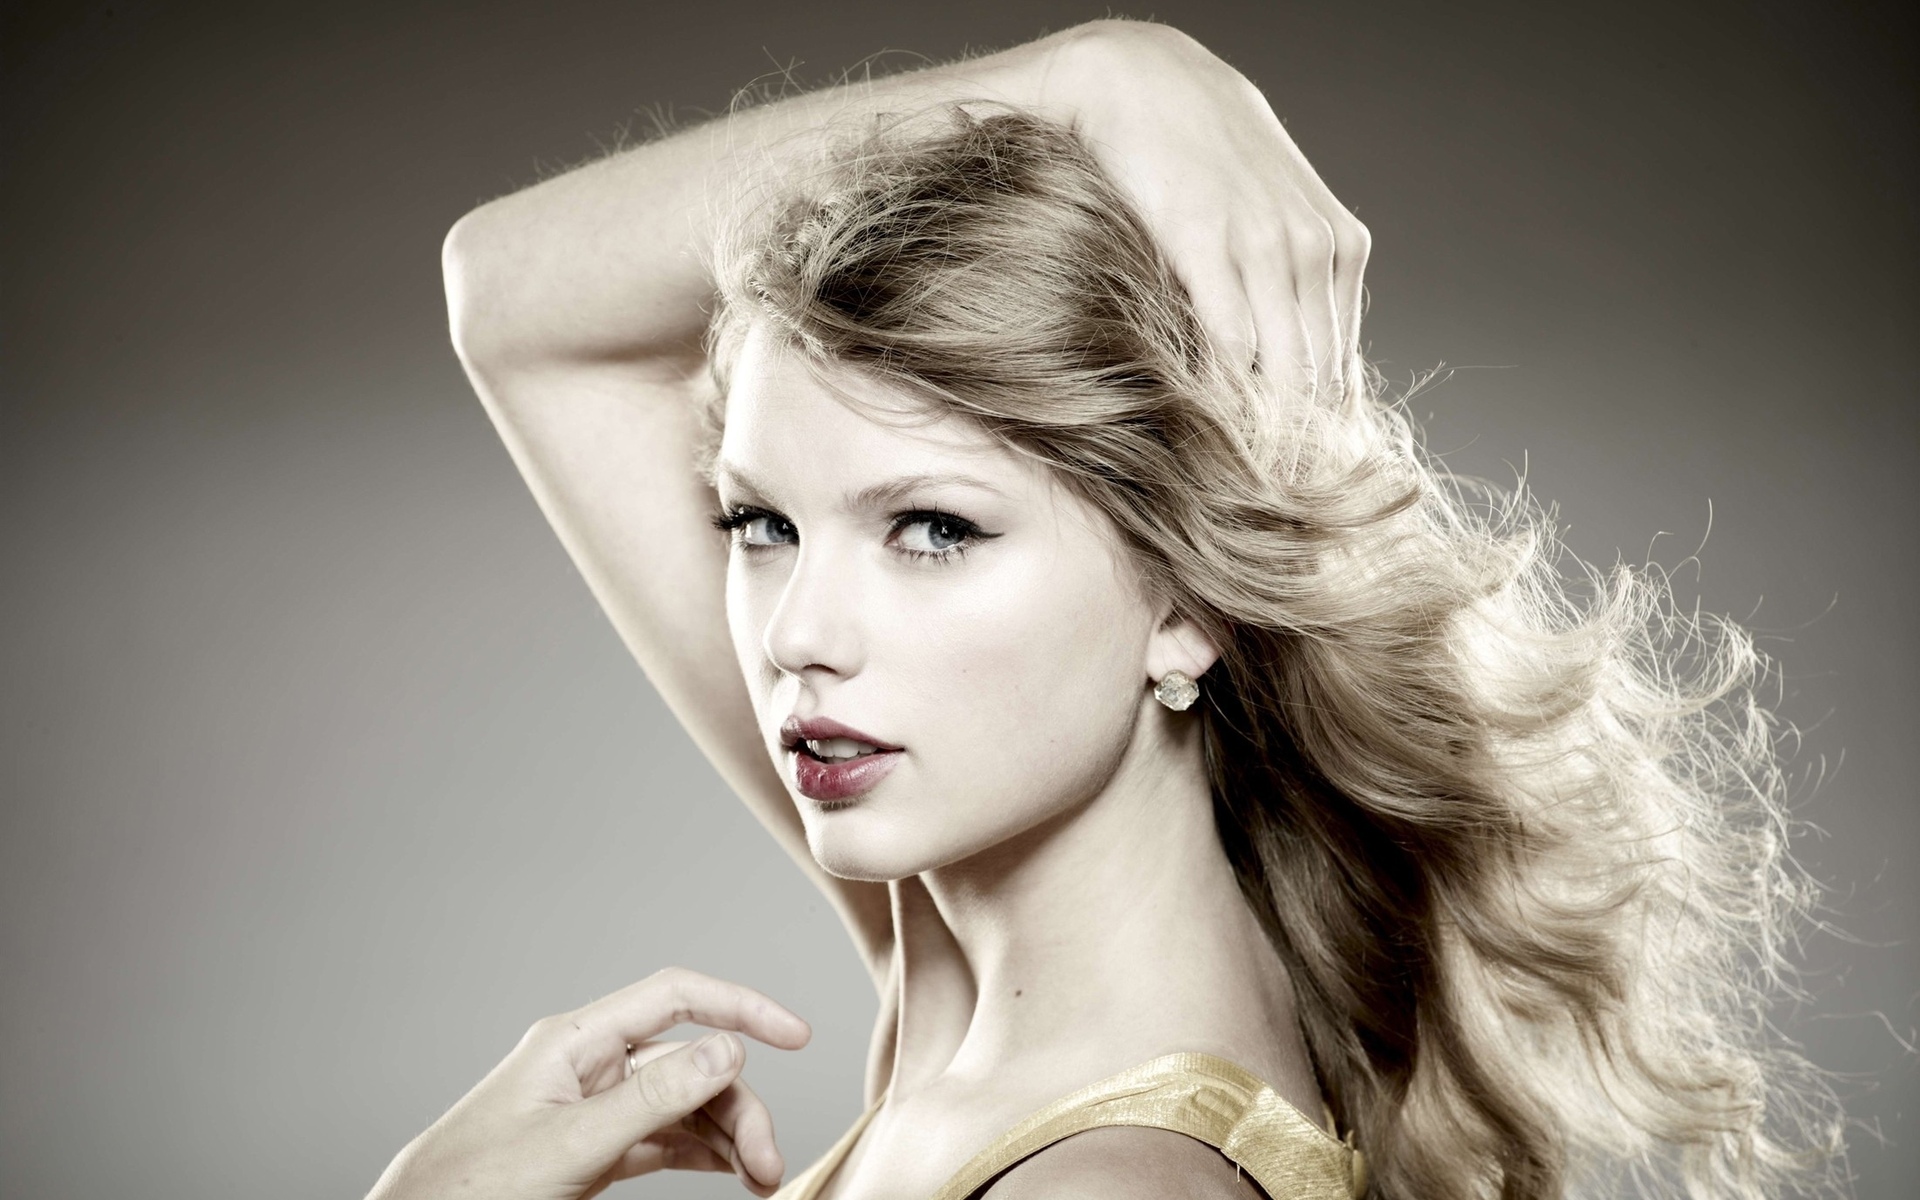 taylor, Swift, Entertainment, Music, Singer, Country, Musician, Celeb, Women, Females, Girls, Babes, Blondes, Face, Ayes, Lips, Pose Wallpaper